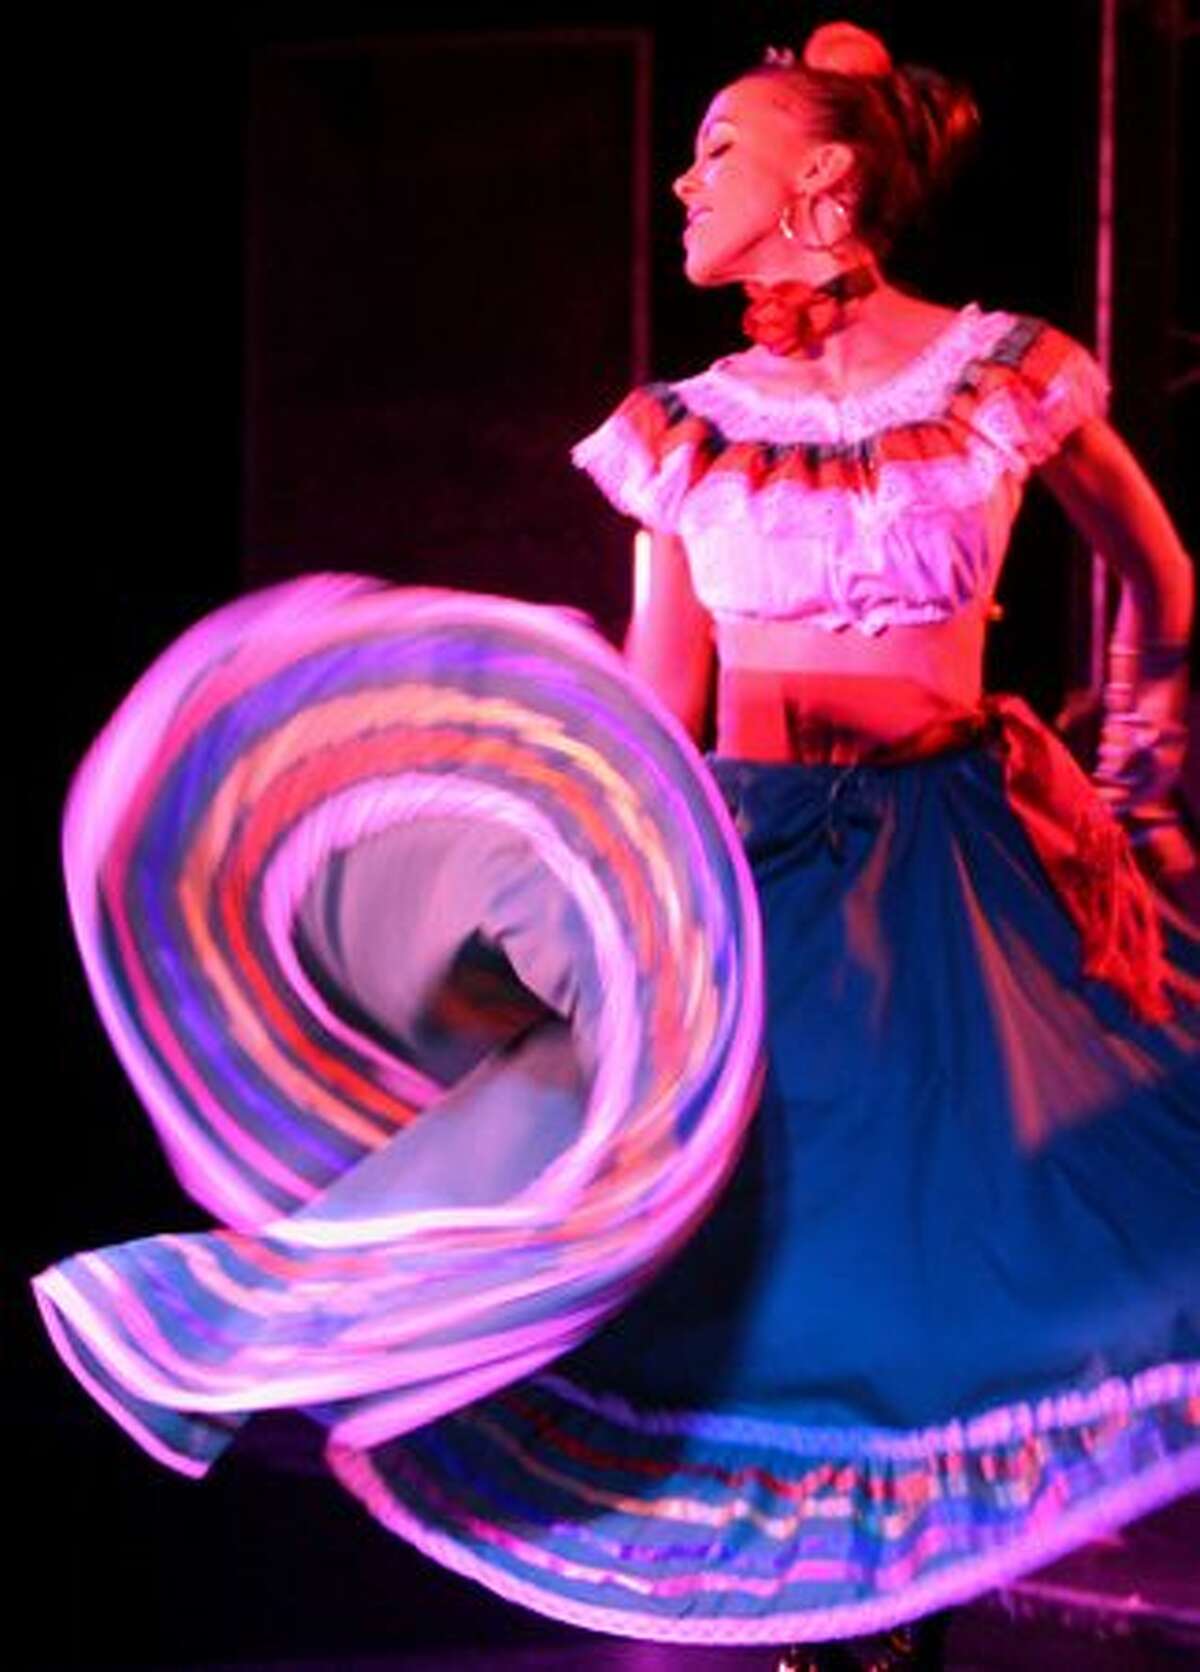 A dancer twirls her dress during a performance of Lucha VaVOOM at the Showbox Sodo on Sunday May 16, 2010. Lucha VaVOOM is a combination of Mexican wrestling, burlesque and comedy.